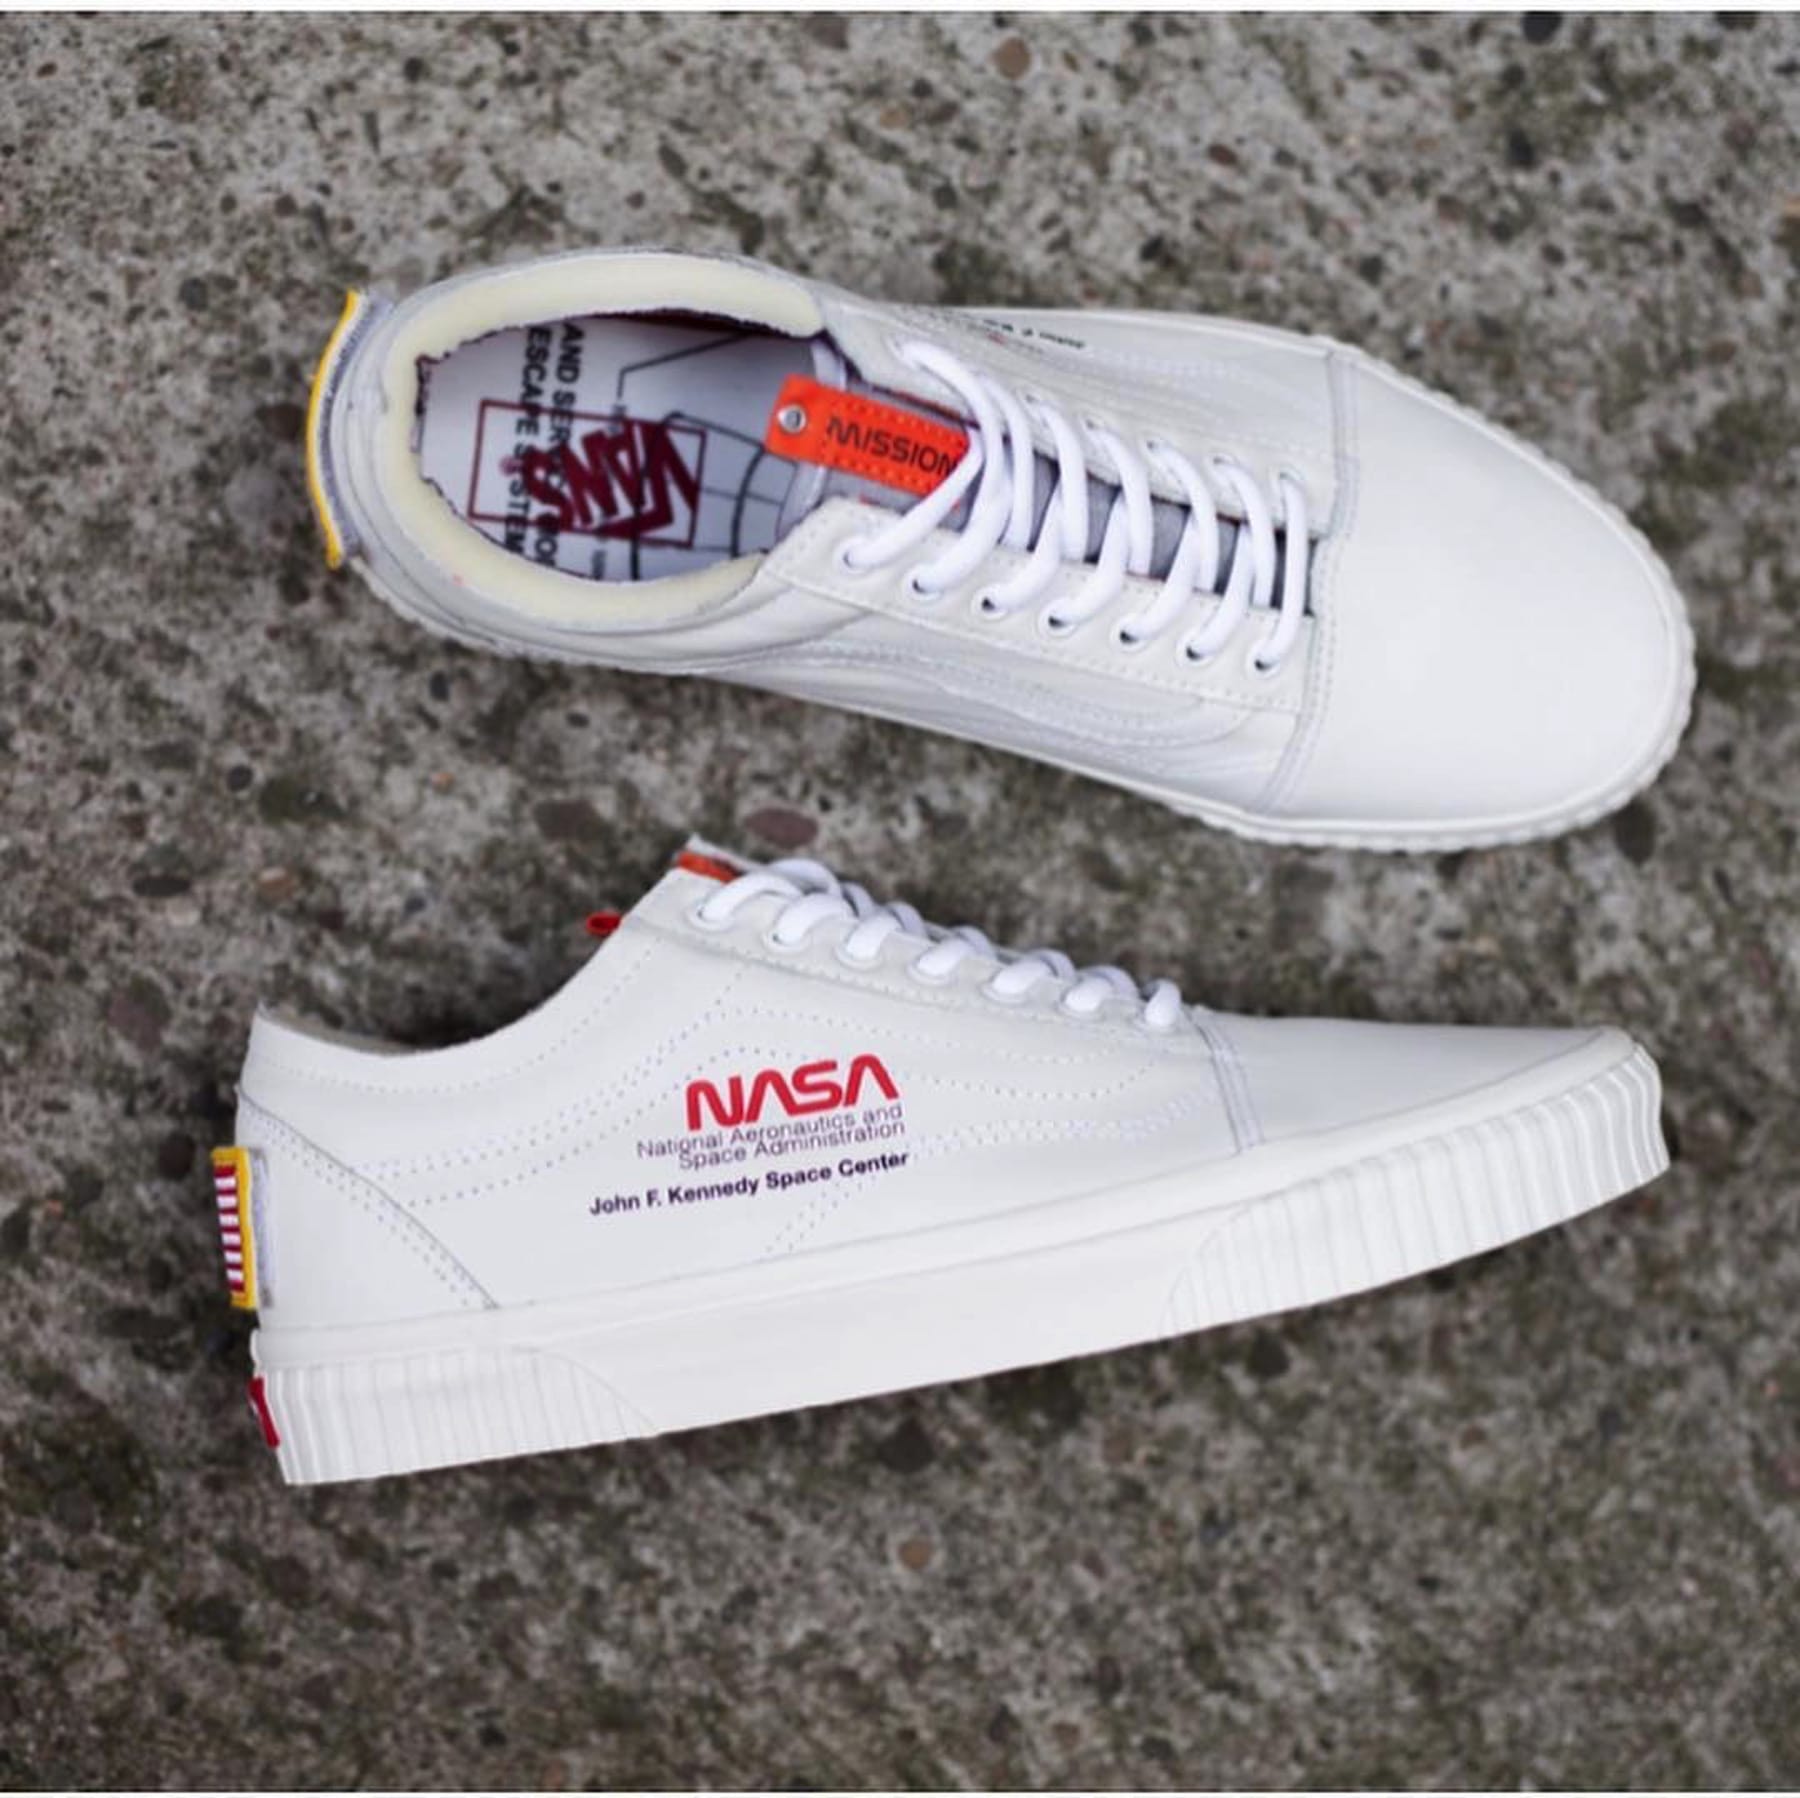 The Exclusive NASA x Vans Collection Is An Epic Launch Not To Be Missed! – SHOUT1800 x 1798